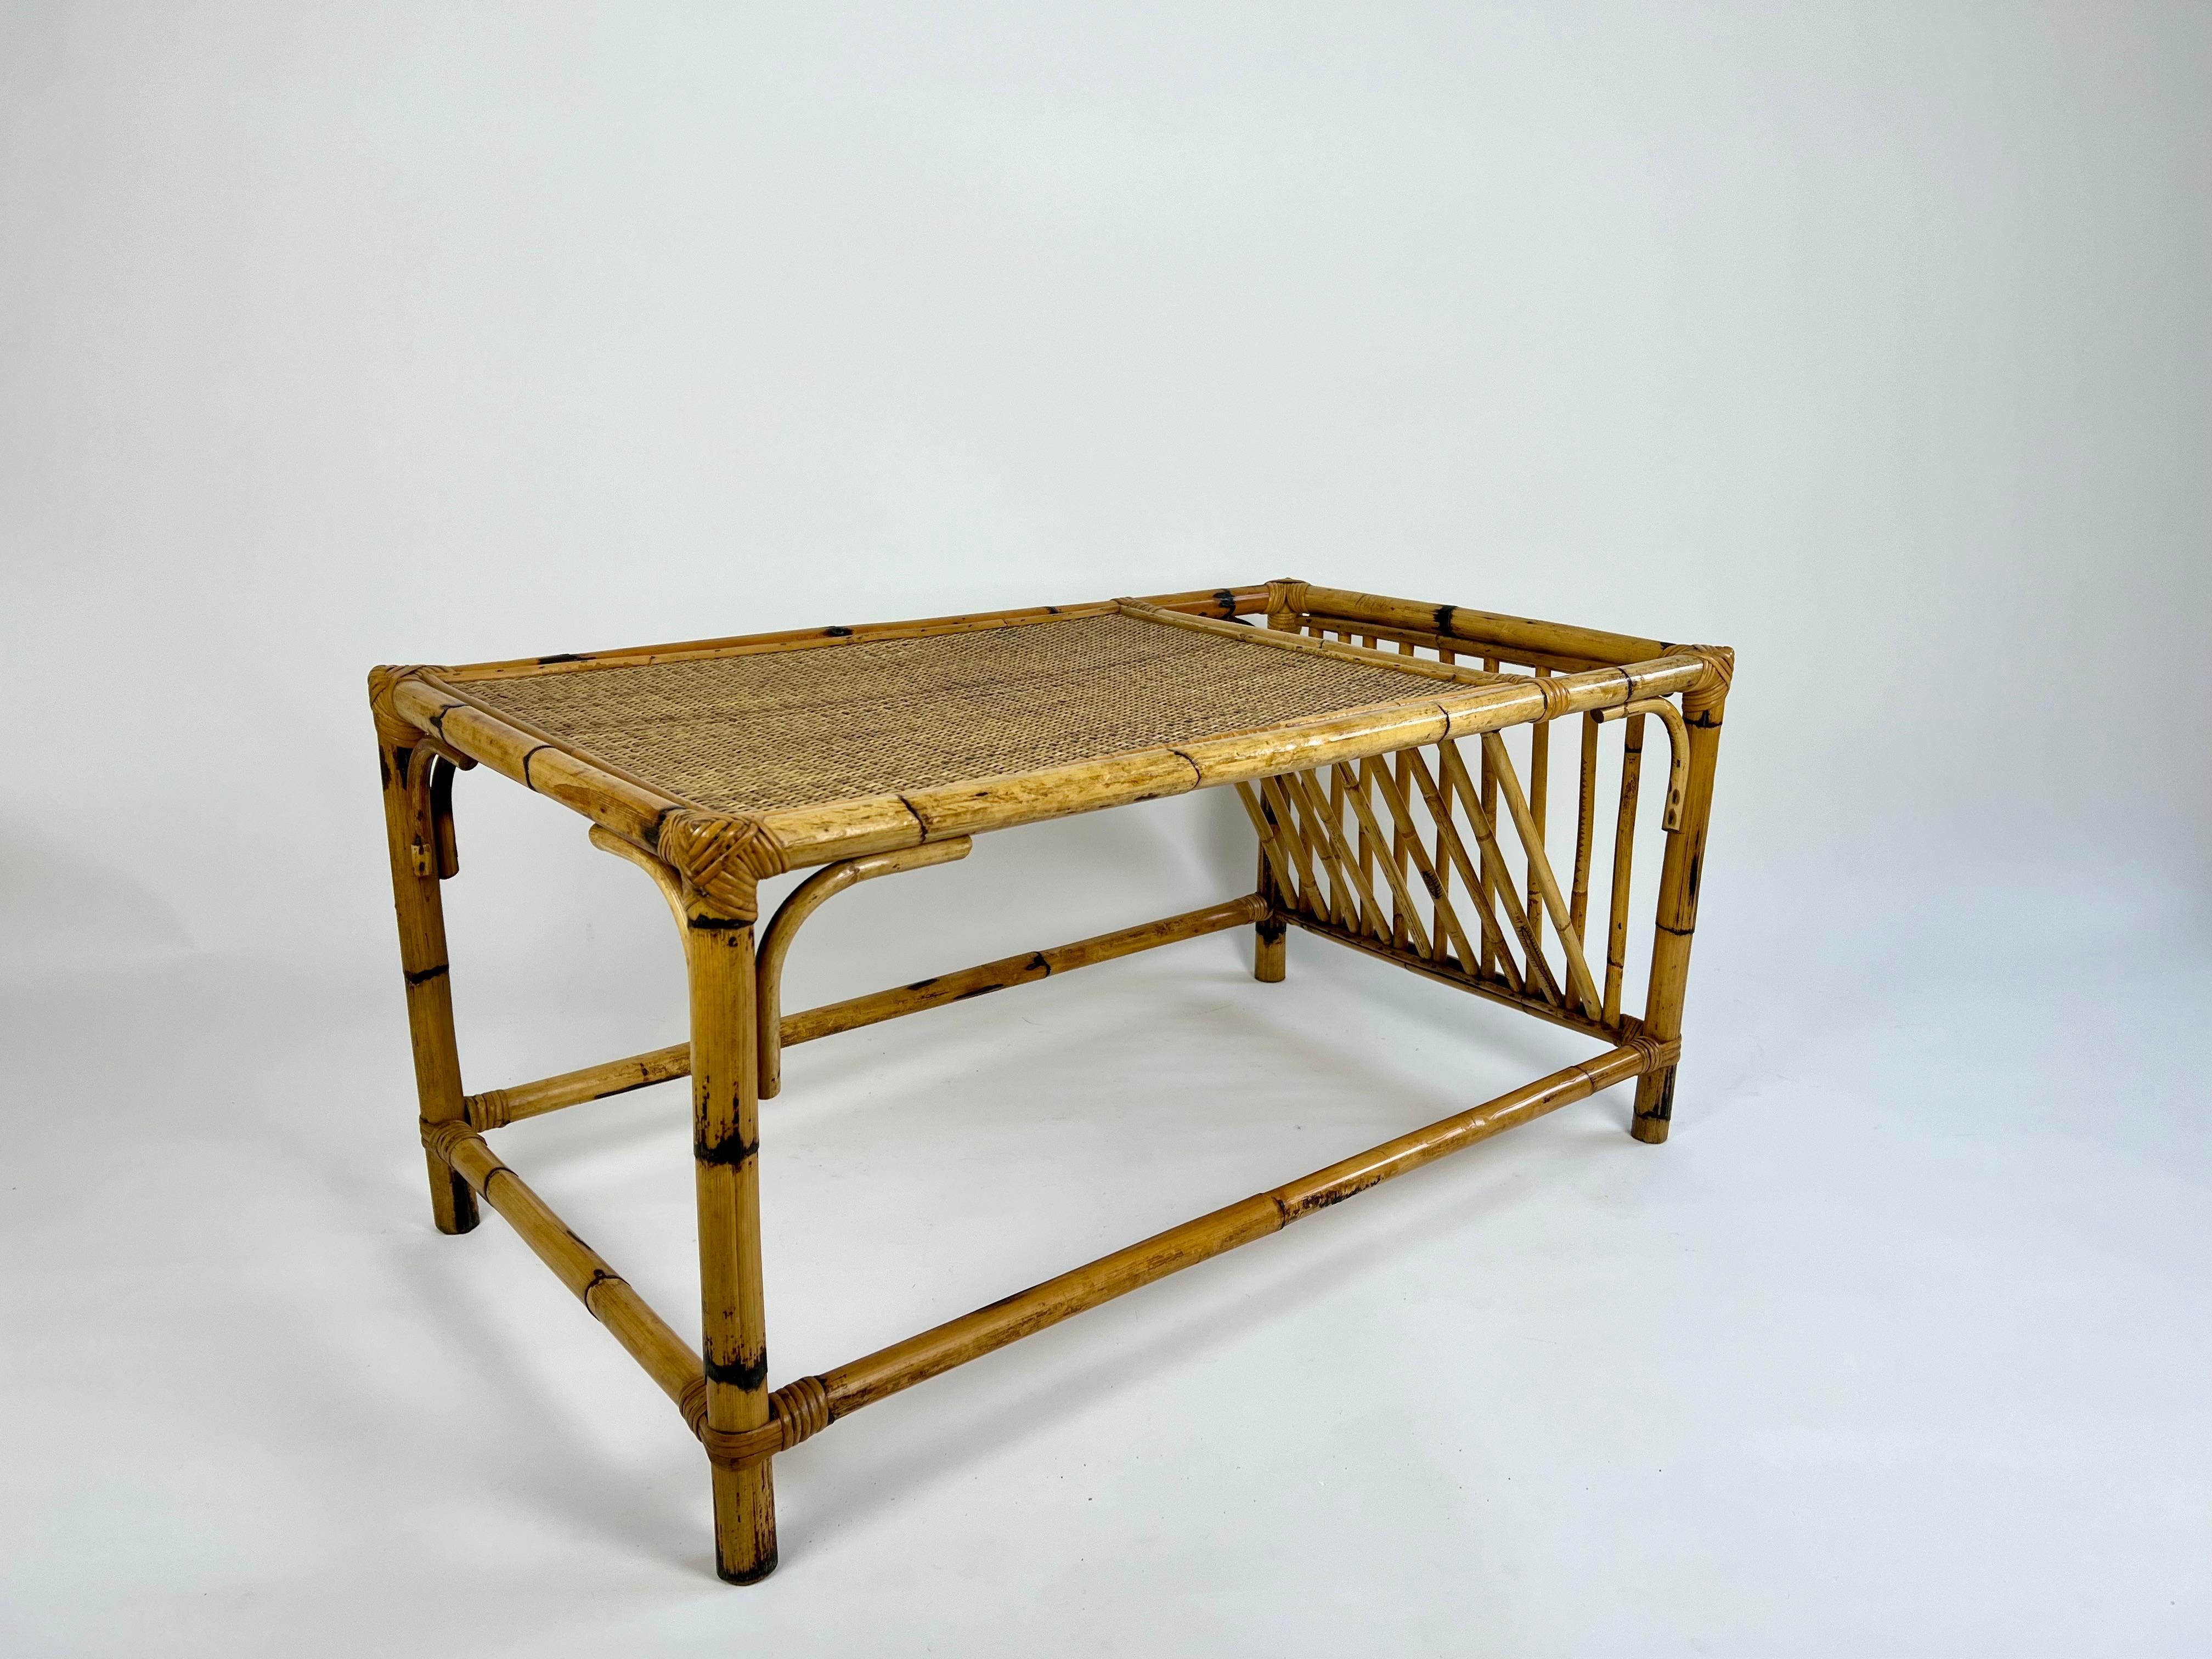 Stylish vintage coffee table with magazine rack in the manner of Vivai del Sud, sourced from Italy.

Bamboo frame with rattan top with great aged colour.

The table is sturdy with no damage or missing parts. Cleaned, ready for use.

Worldwide